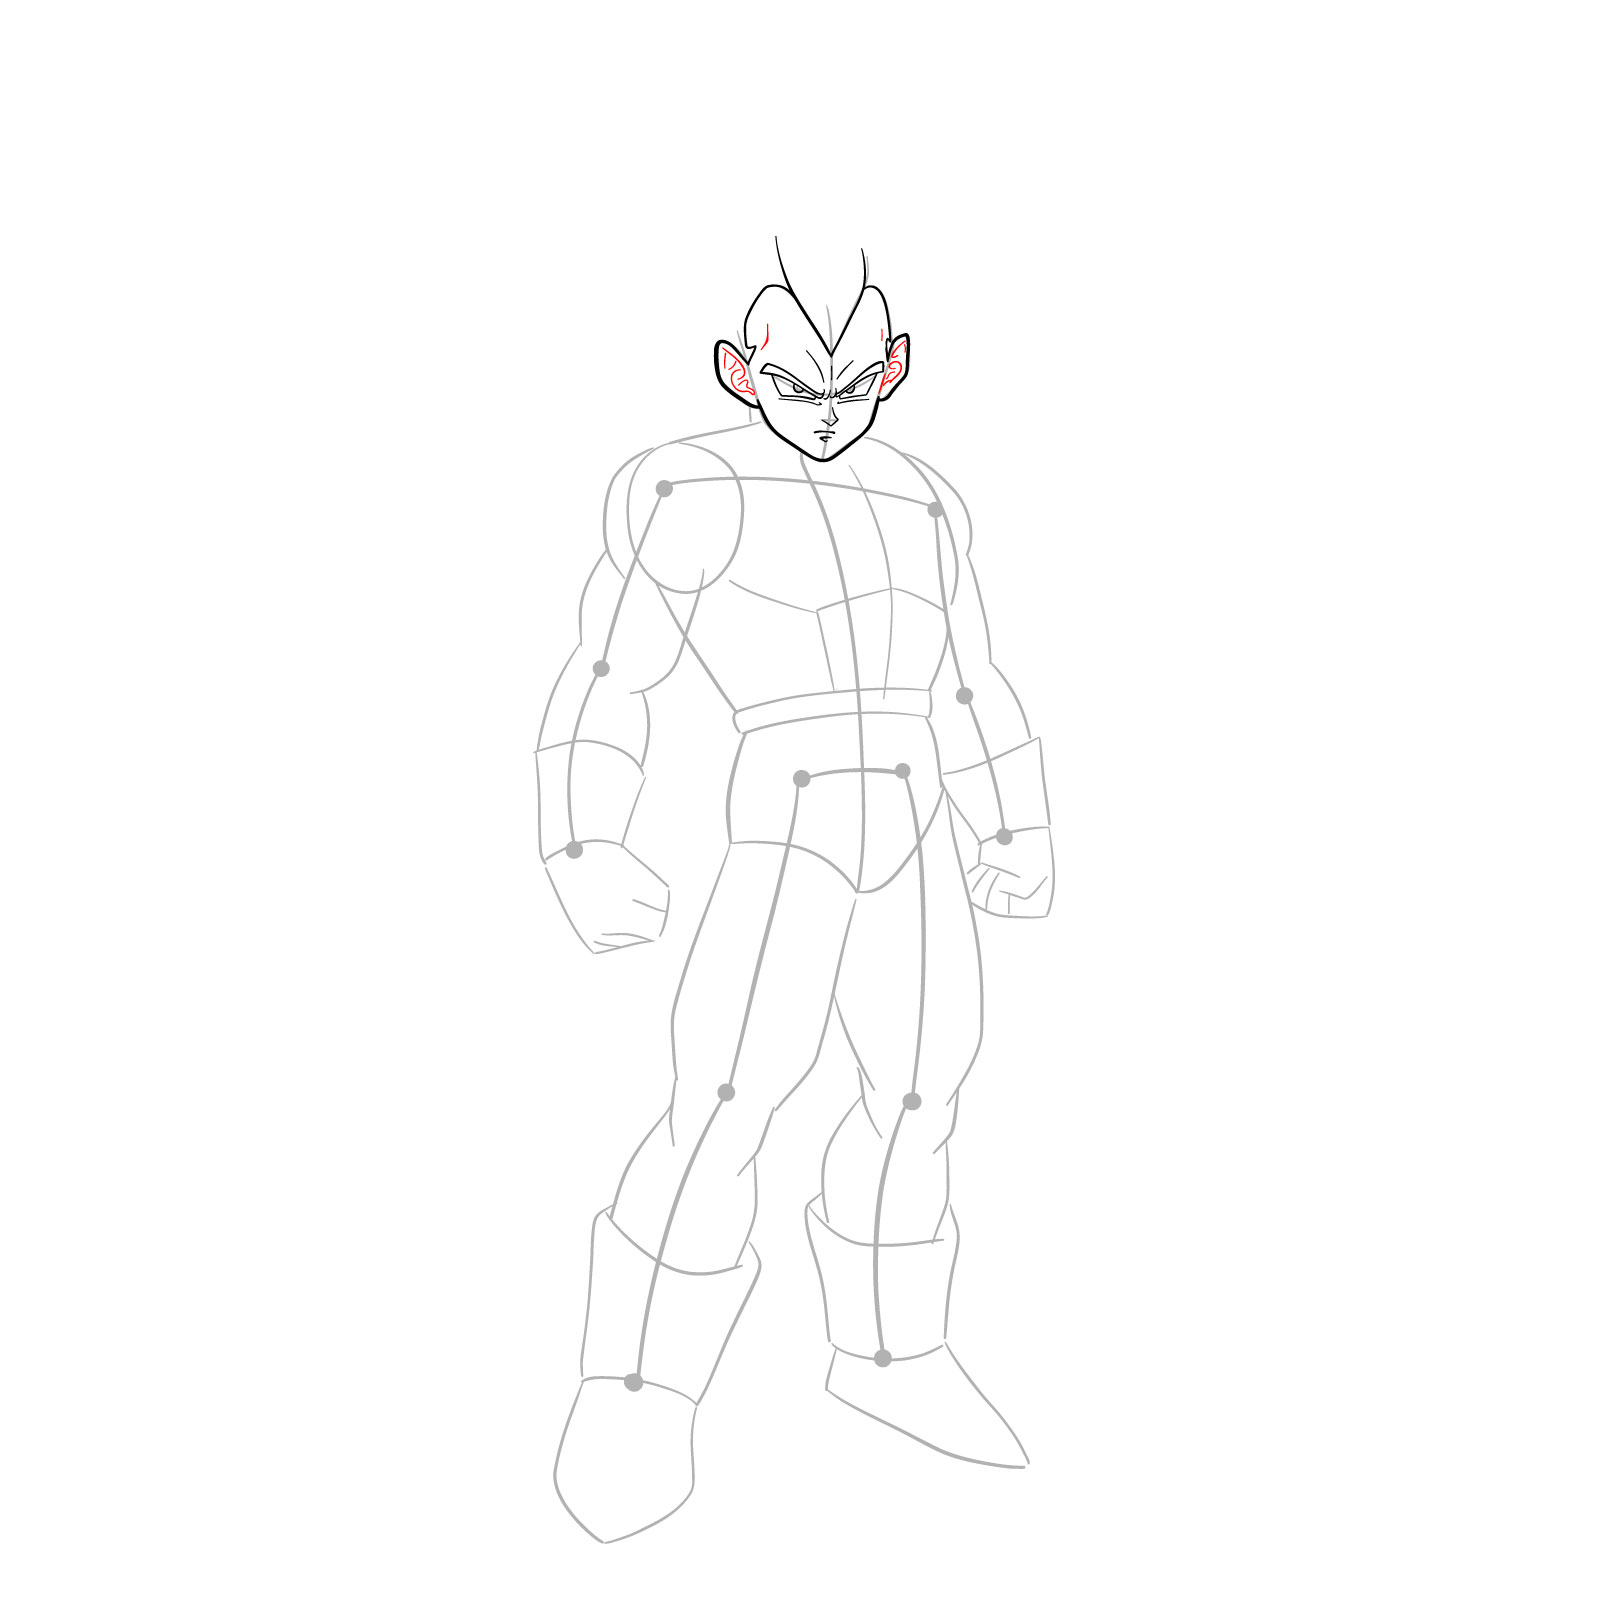 How to draw Vegeta in SSGSS - step 12